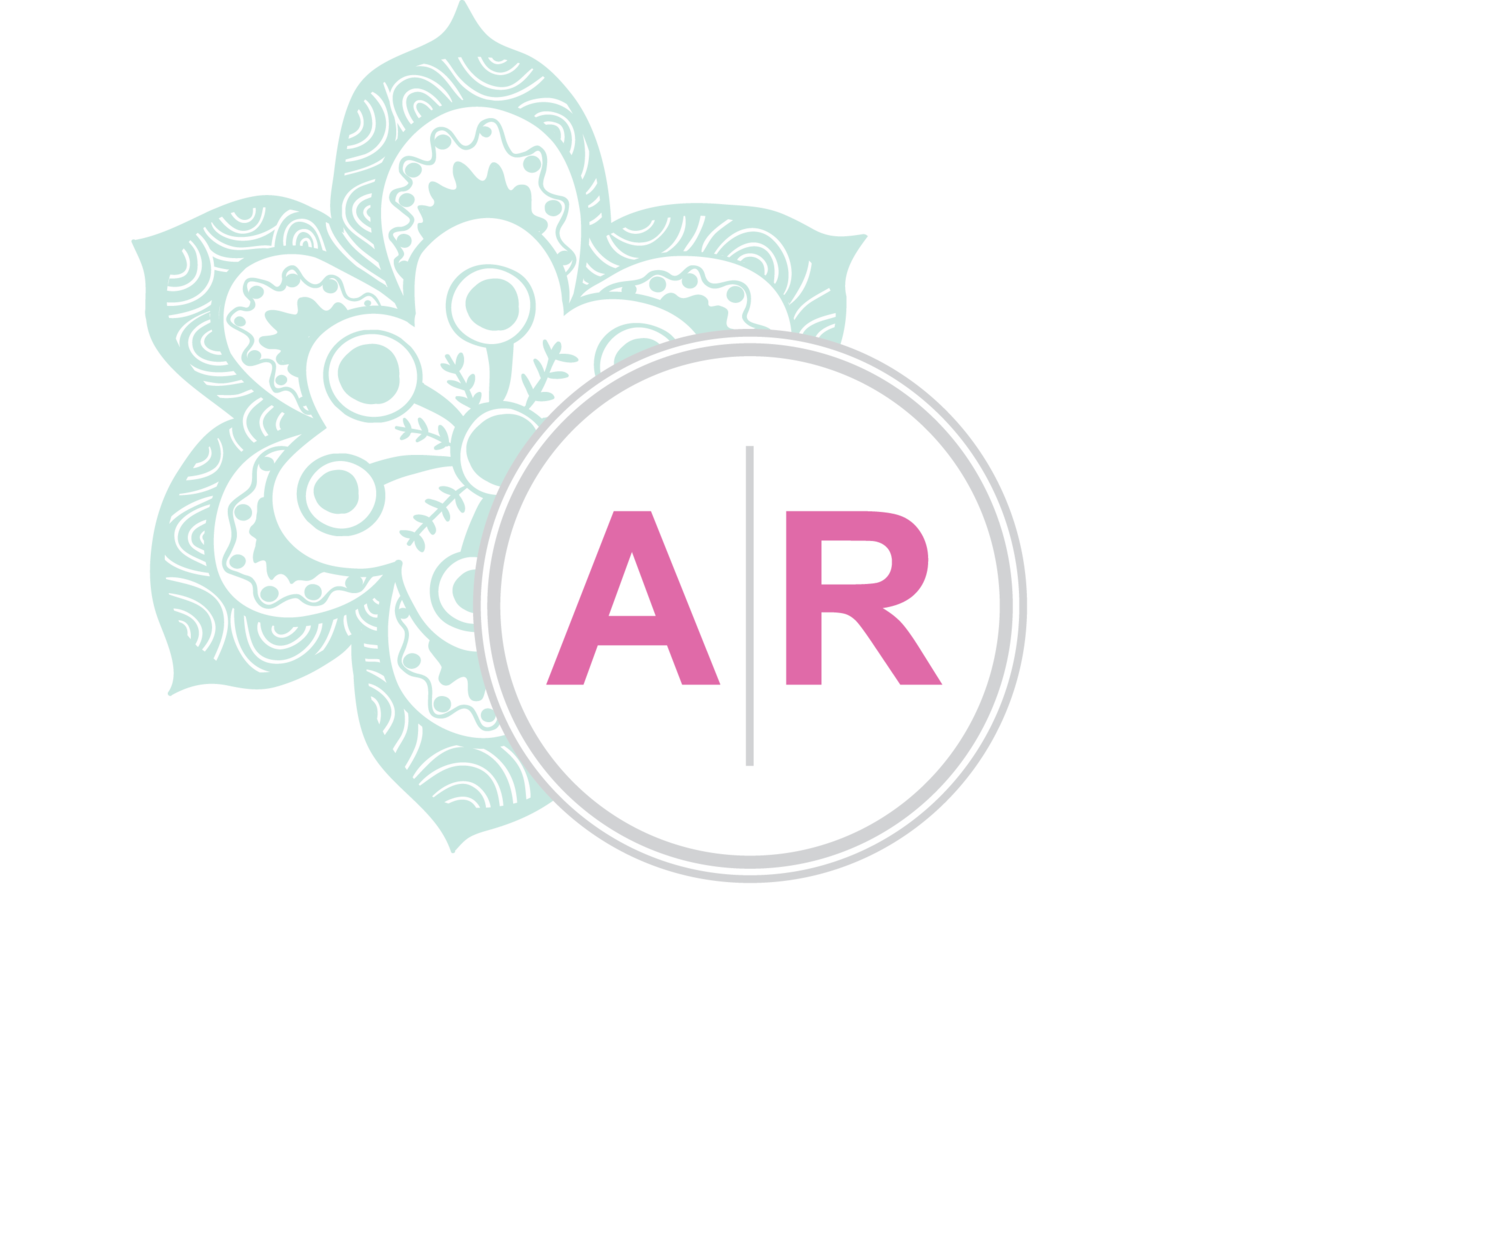 Aisle Runners Wedding Consulting Services  |  Houston, Texas